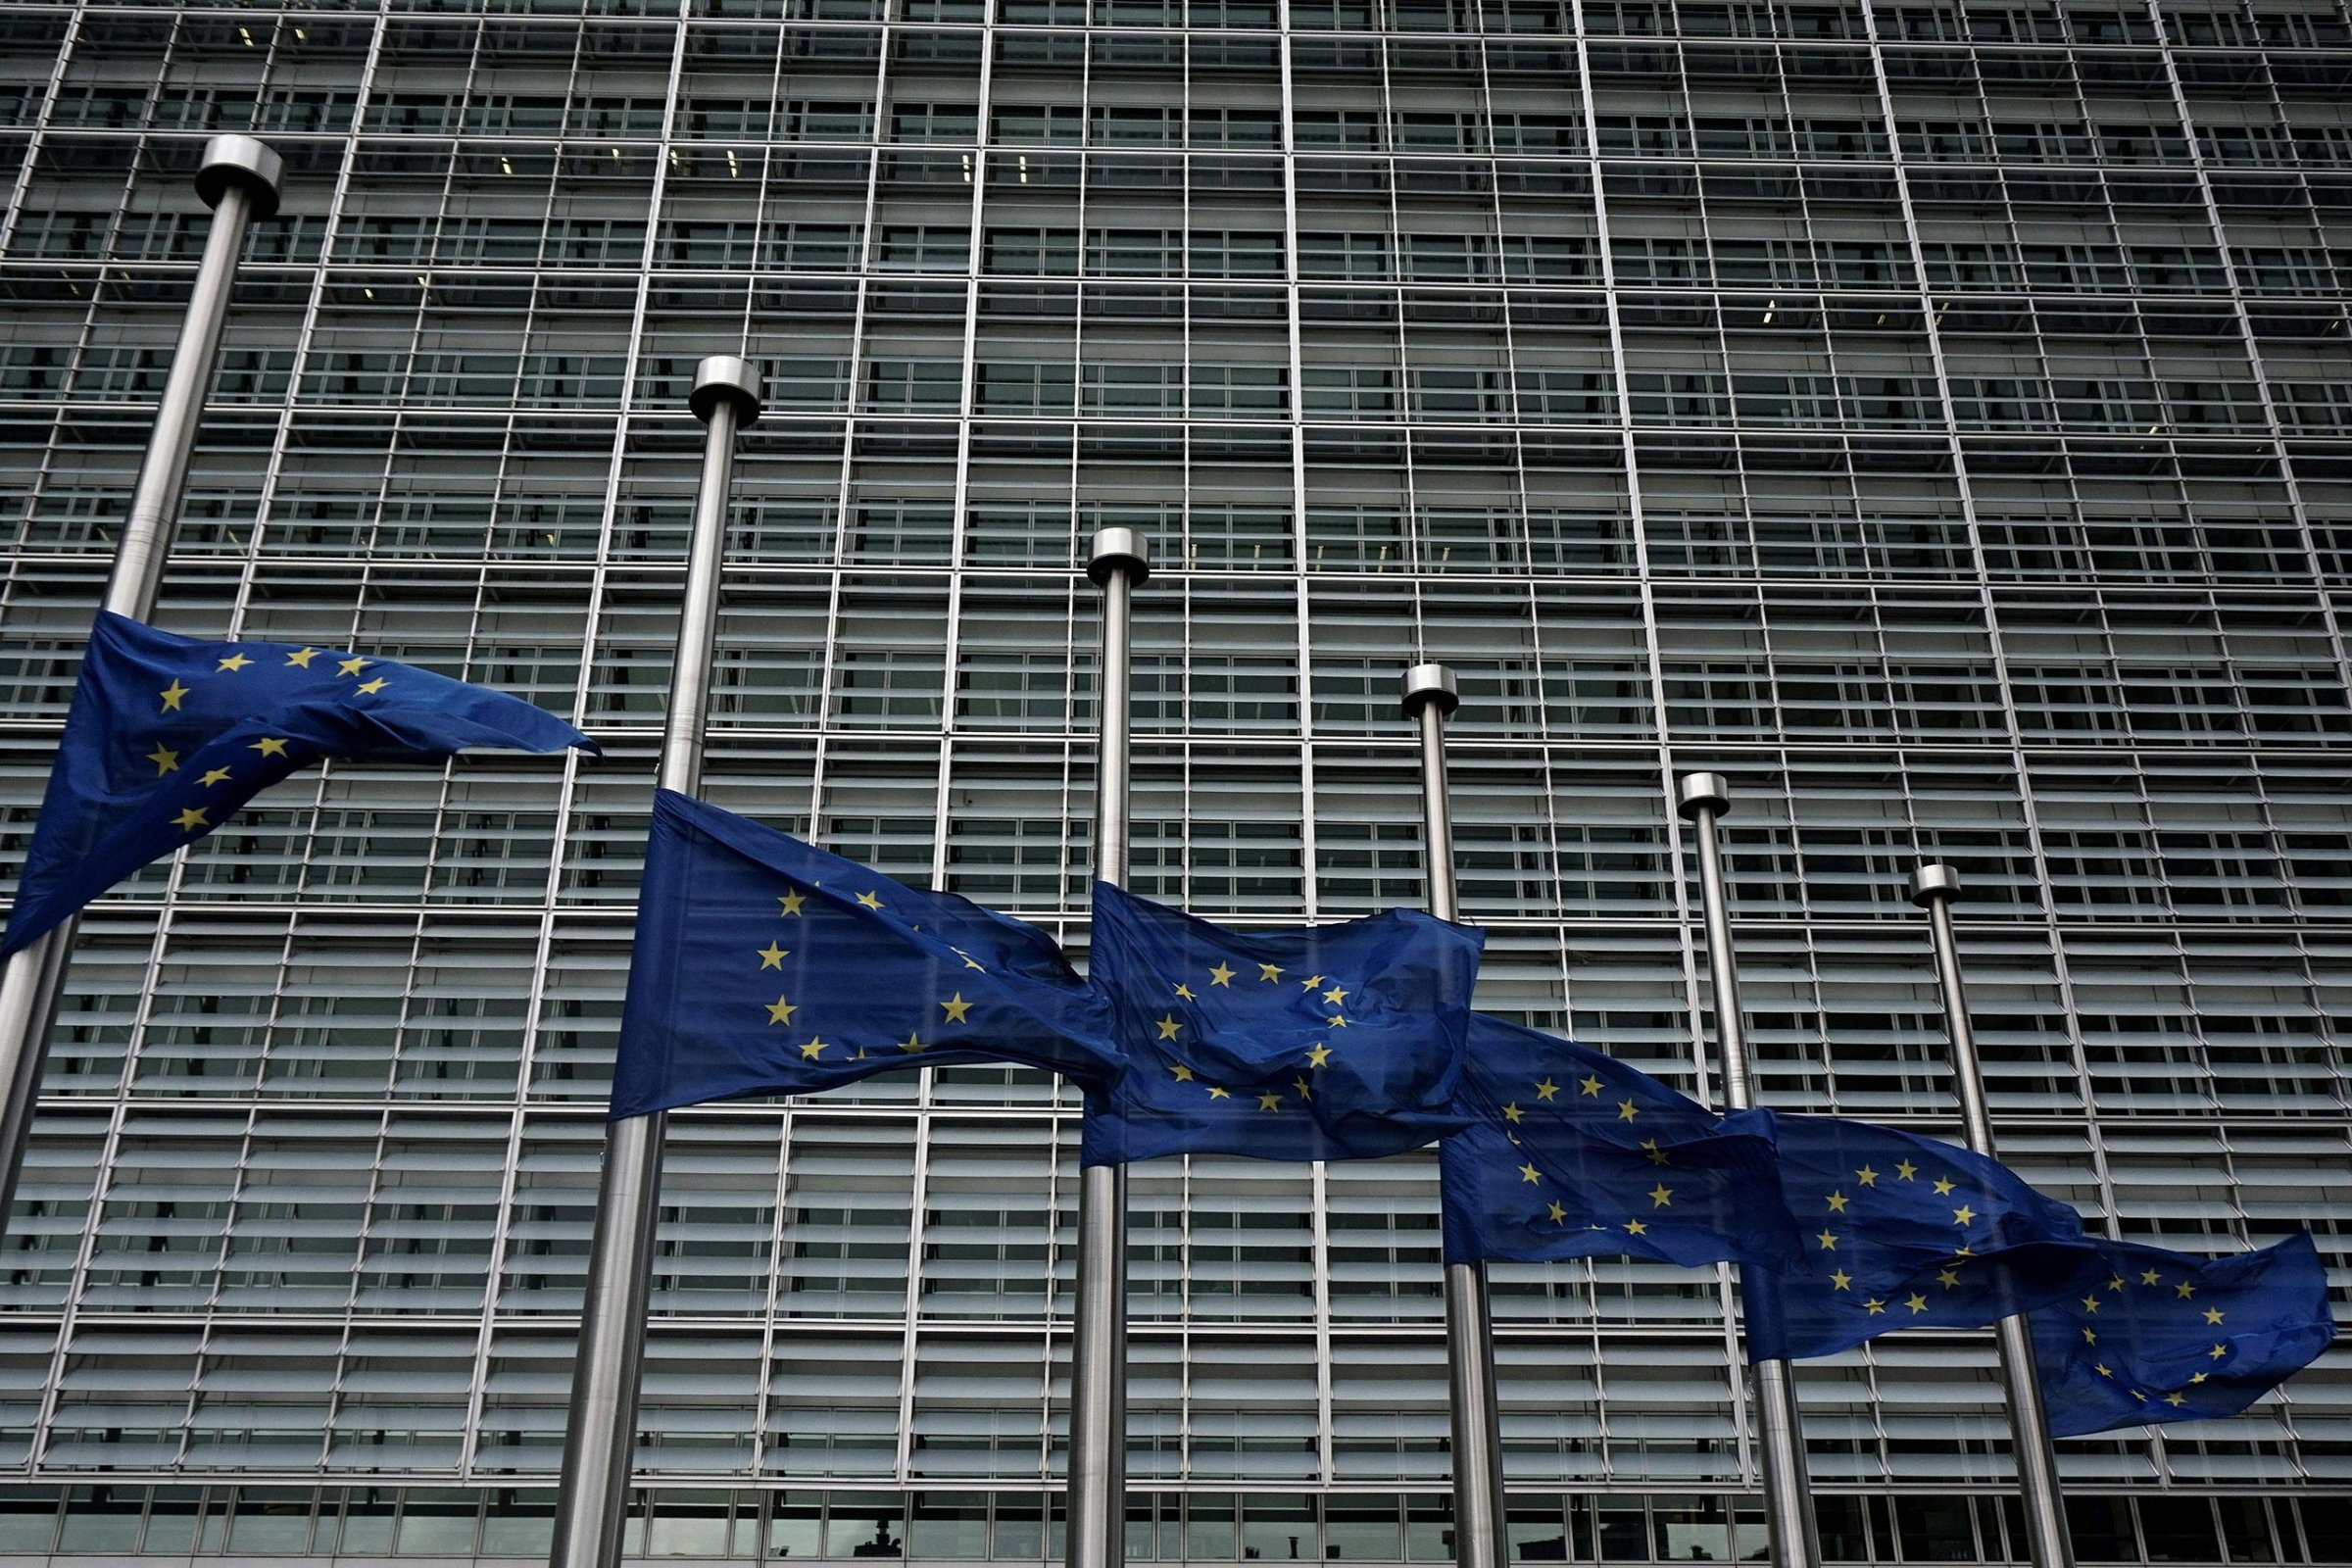 European Union flags fly at half-staff outside the European Commission building in Brussels on March 23, 2016, a day after twin blasts hit the Belgian capital.